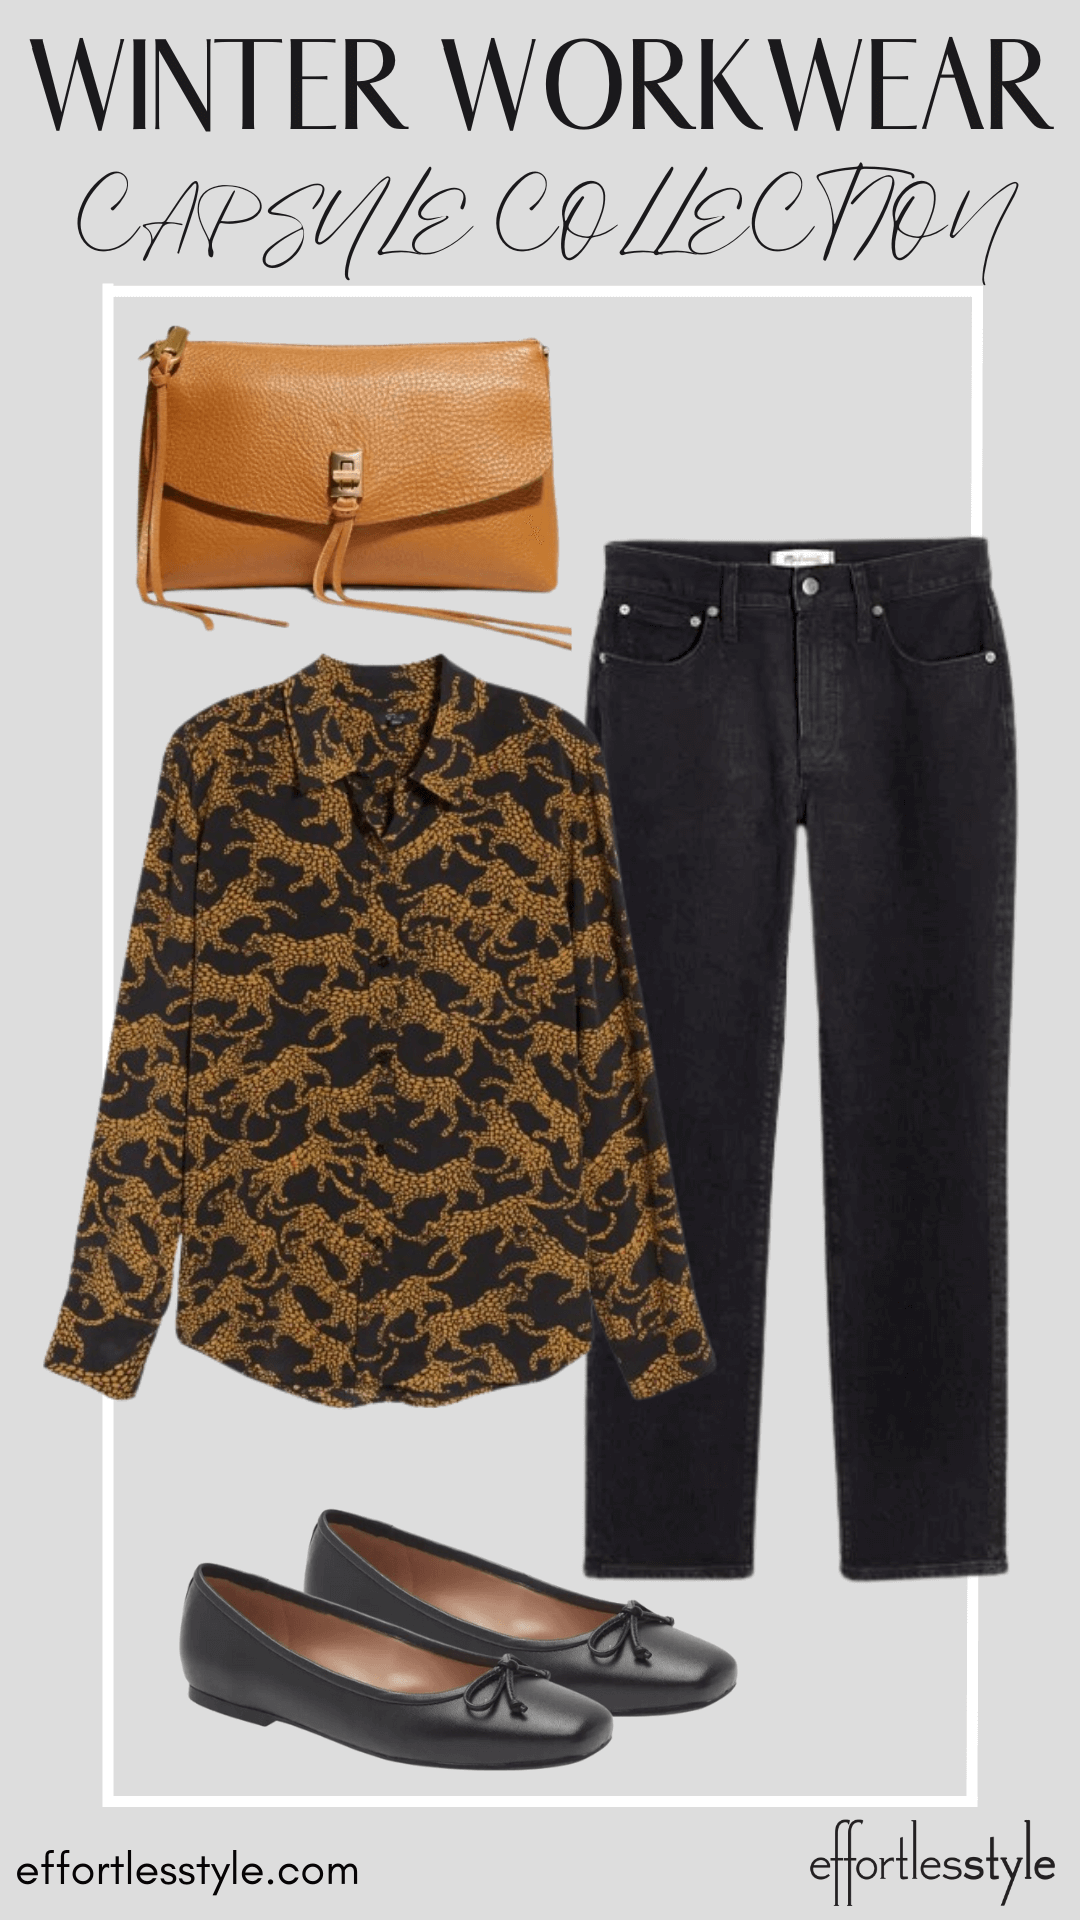 Lynx Printed Blouse & Black Jeans silk blouse for the office how to style an animal print blouse for the office Nashville area personal stylists share blouses for the professional setting how to dress up black jeans neutral crossbody